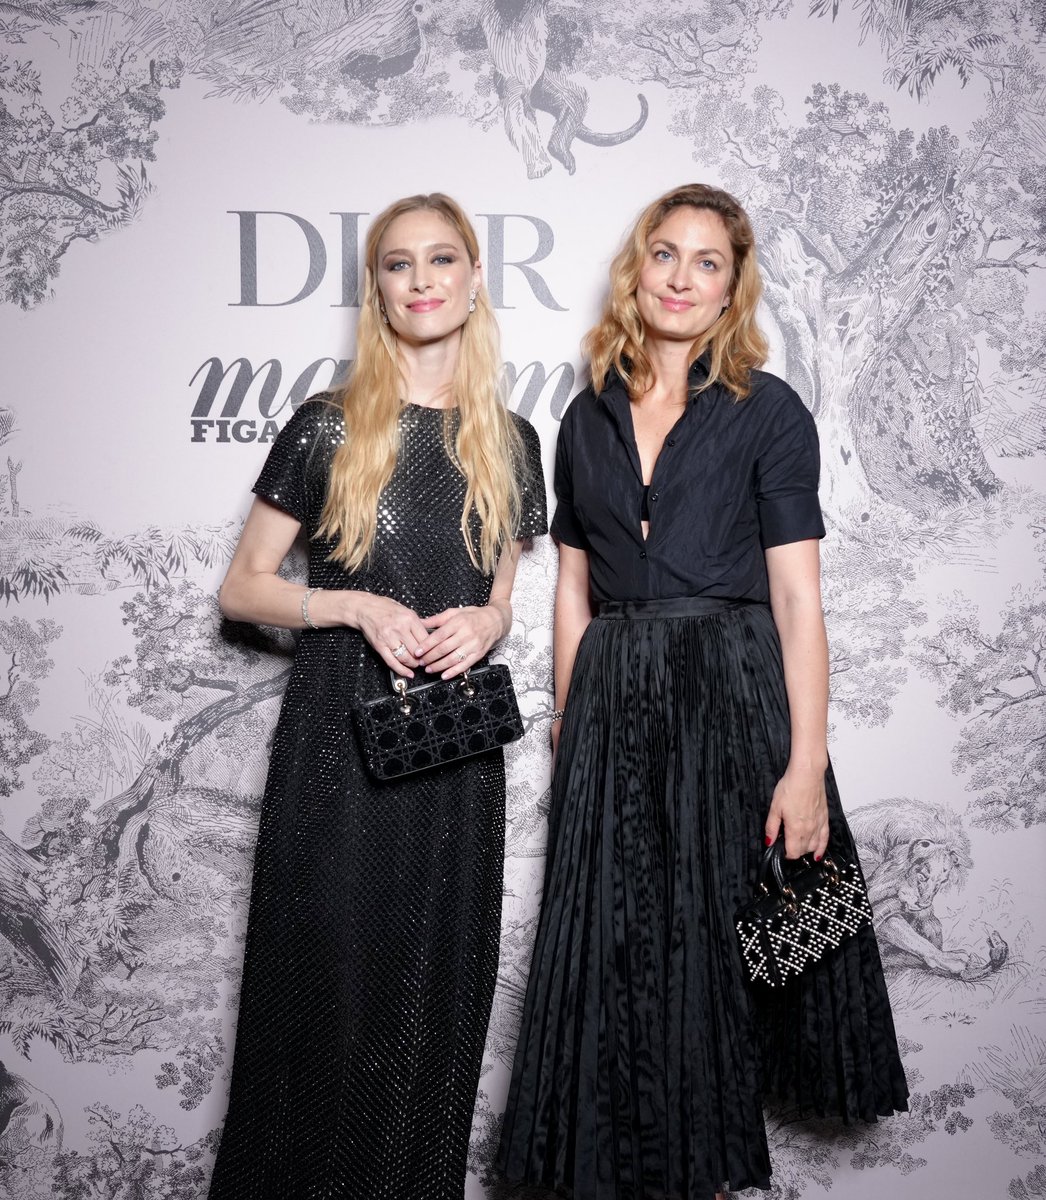 Looking radiant in Dior looks by Maria Grazia Chiuri, House ambassador @BorromeoBea and actress Laure de Clermont-Tonnerre joined the #StarsinDior attending the Dior x @MadameFigaro x @MoetChandon dinner at the @Festival_Cannes 2023.
#DiorCannes #Cannes2023